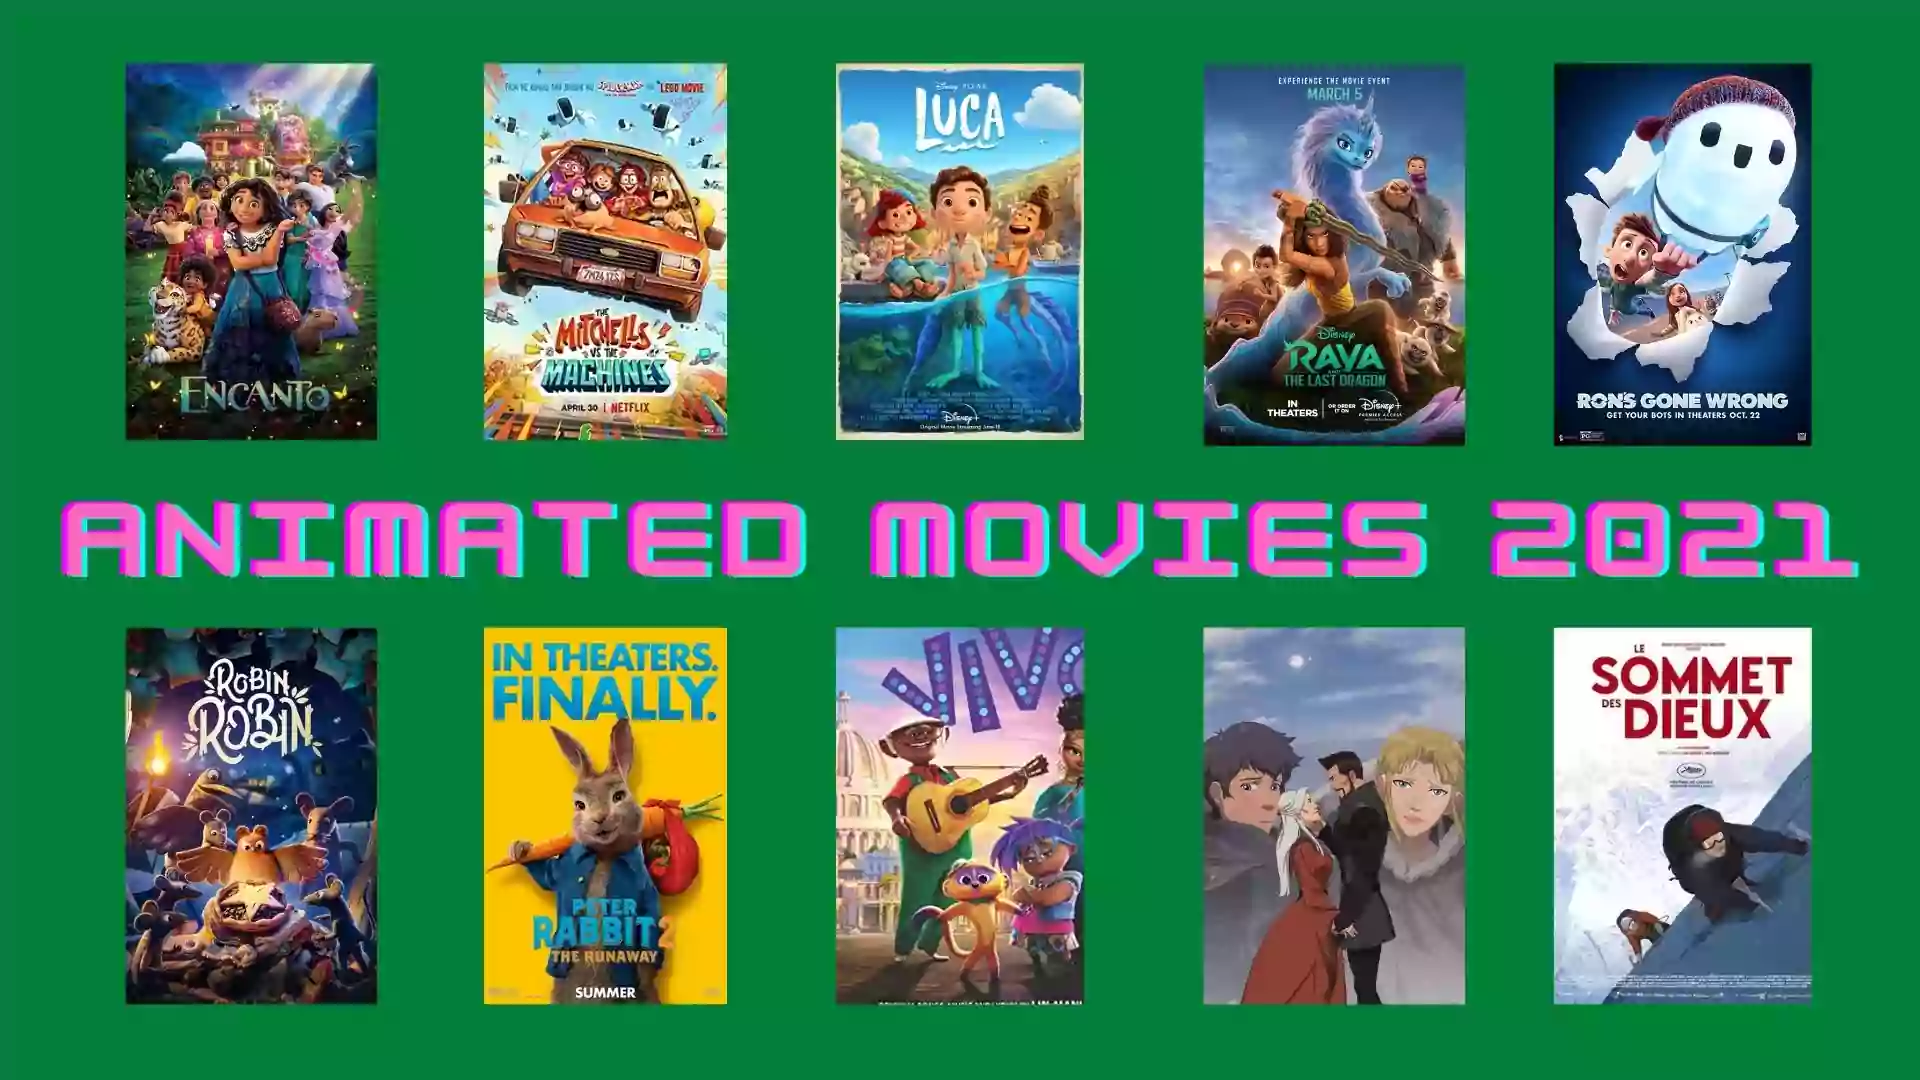 %title% %page% | List of Animated Movies 2021